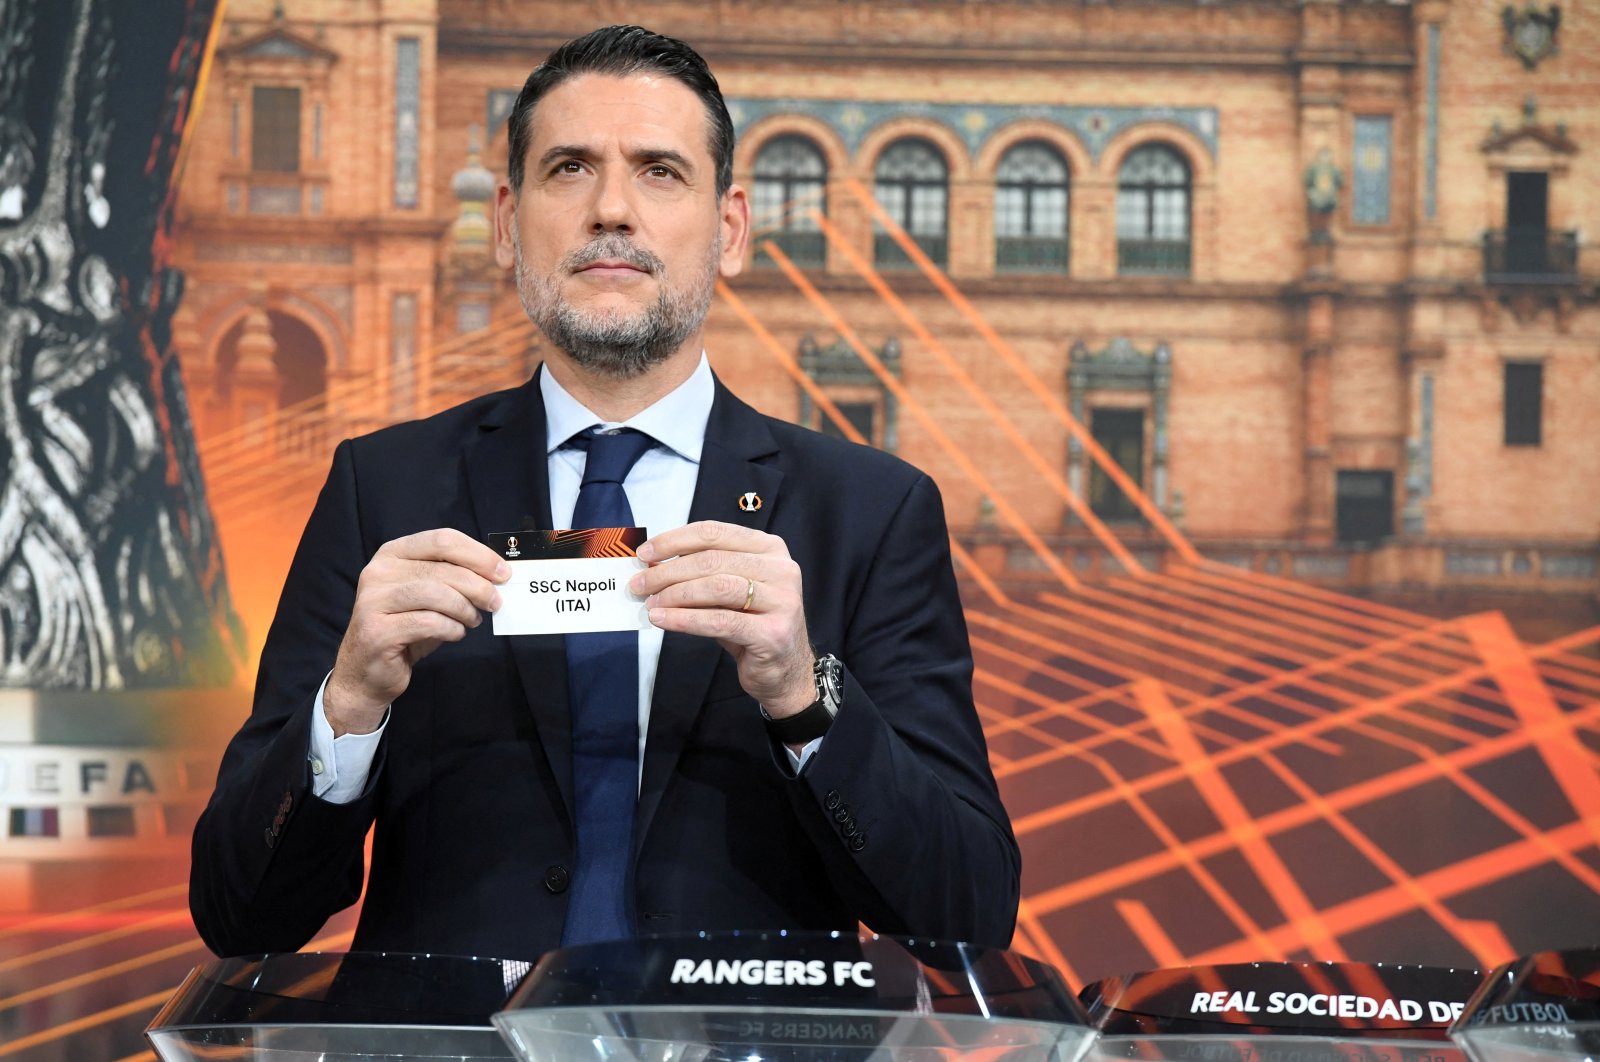 Andres Palop draws Napoli during the UEFA Europa League 2021/22 Knockout Playoff Round Draw at the UEFA headquarters, Nyon, Switzerland, Dec. 13, 2021. (Reuters Photo)